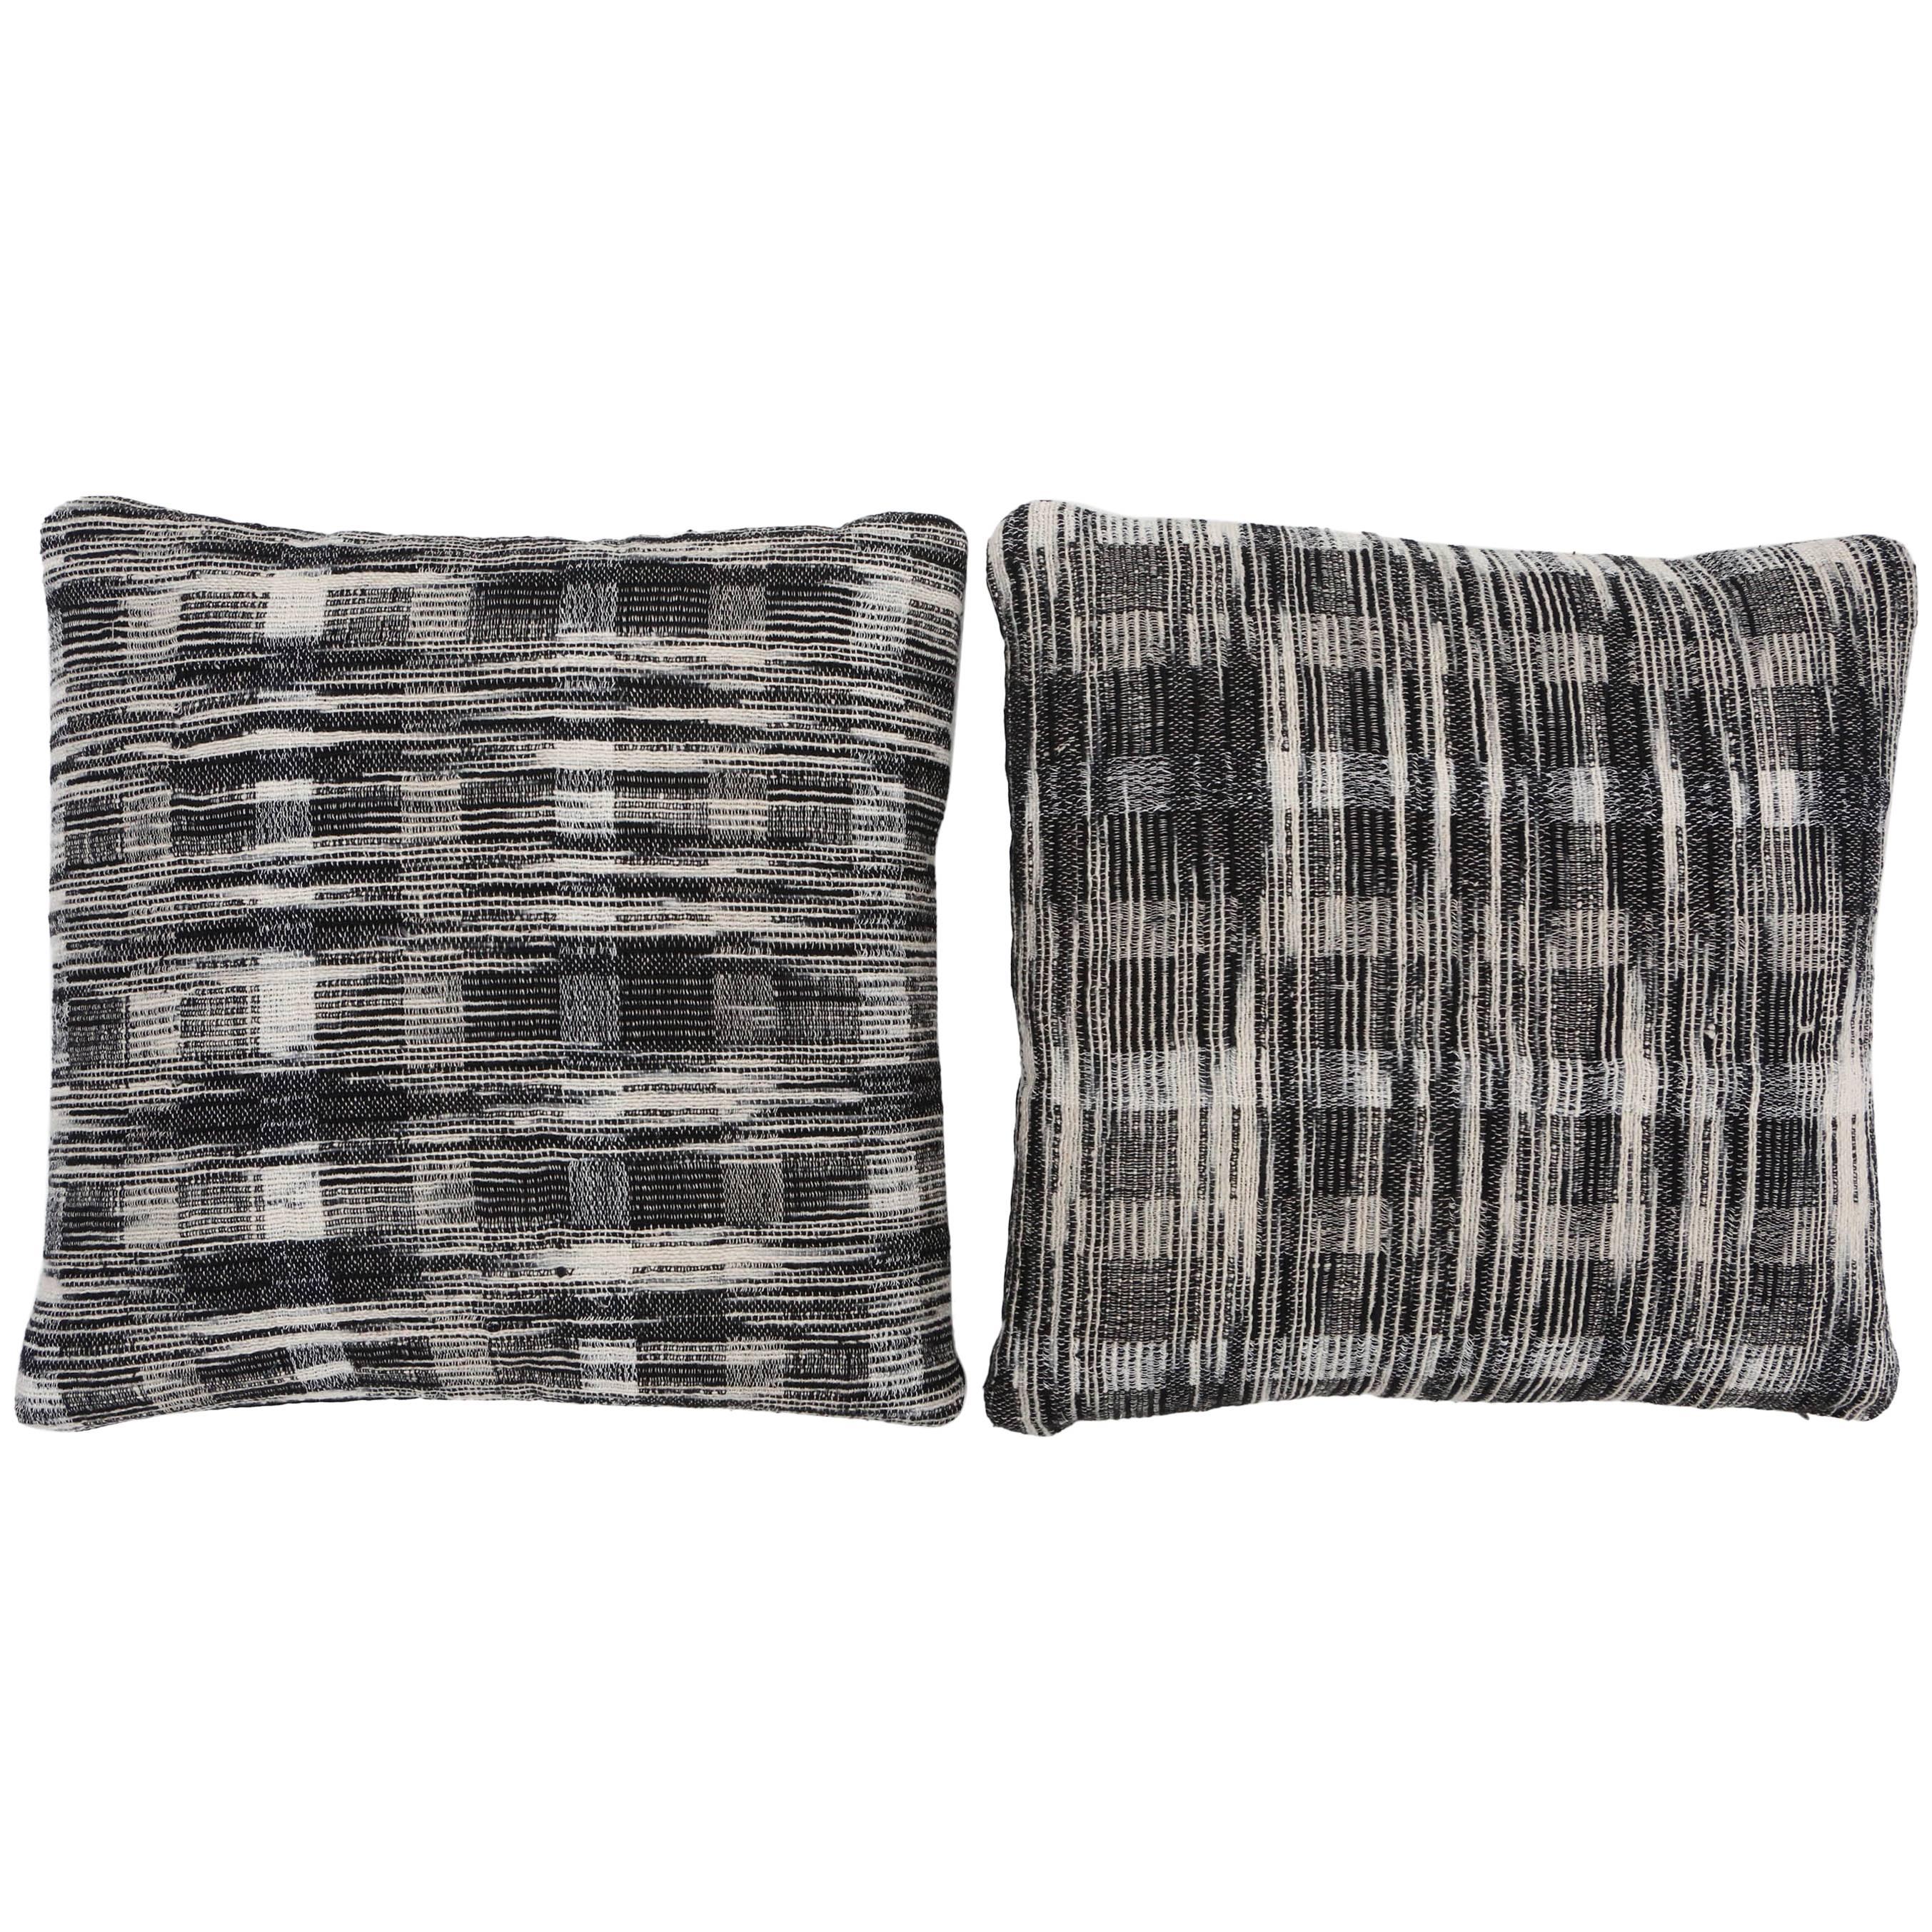 Indian Hand Woven Pillow.  Black and White.  Linen and Silk.   For Sale